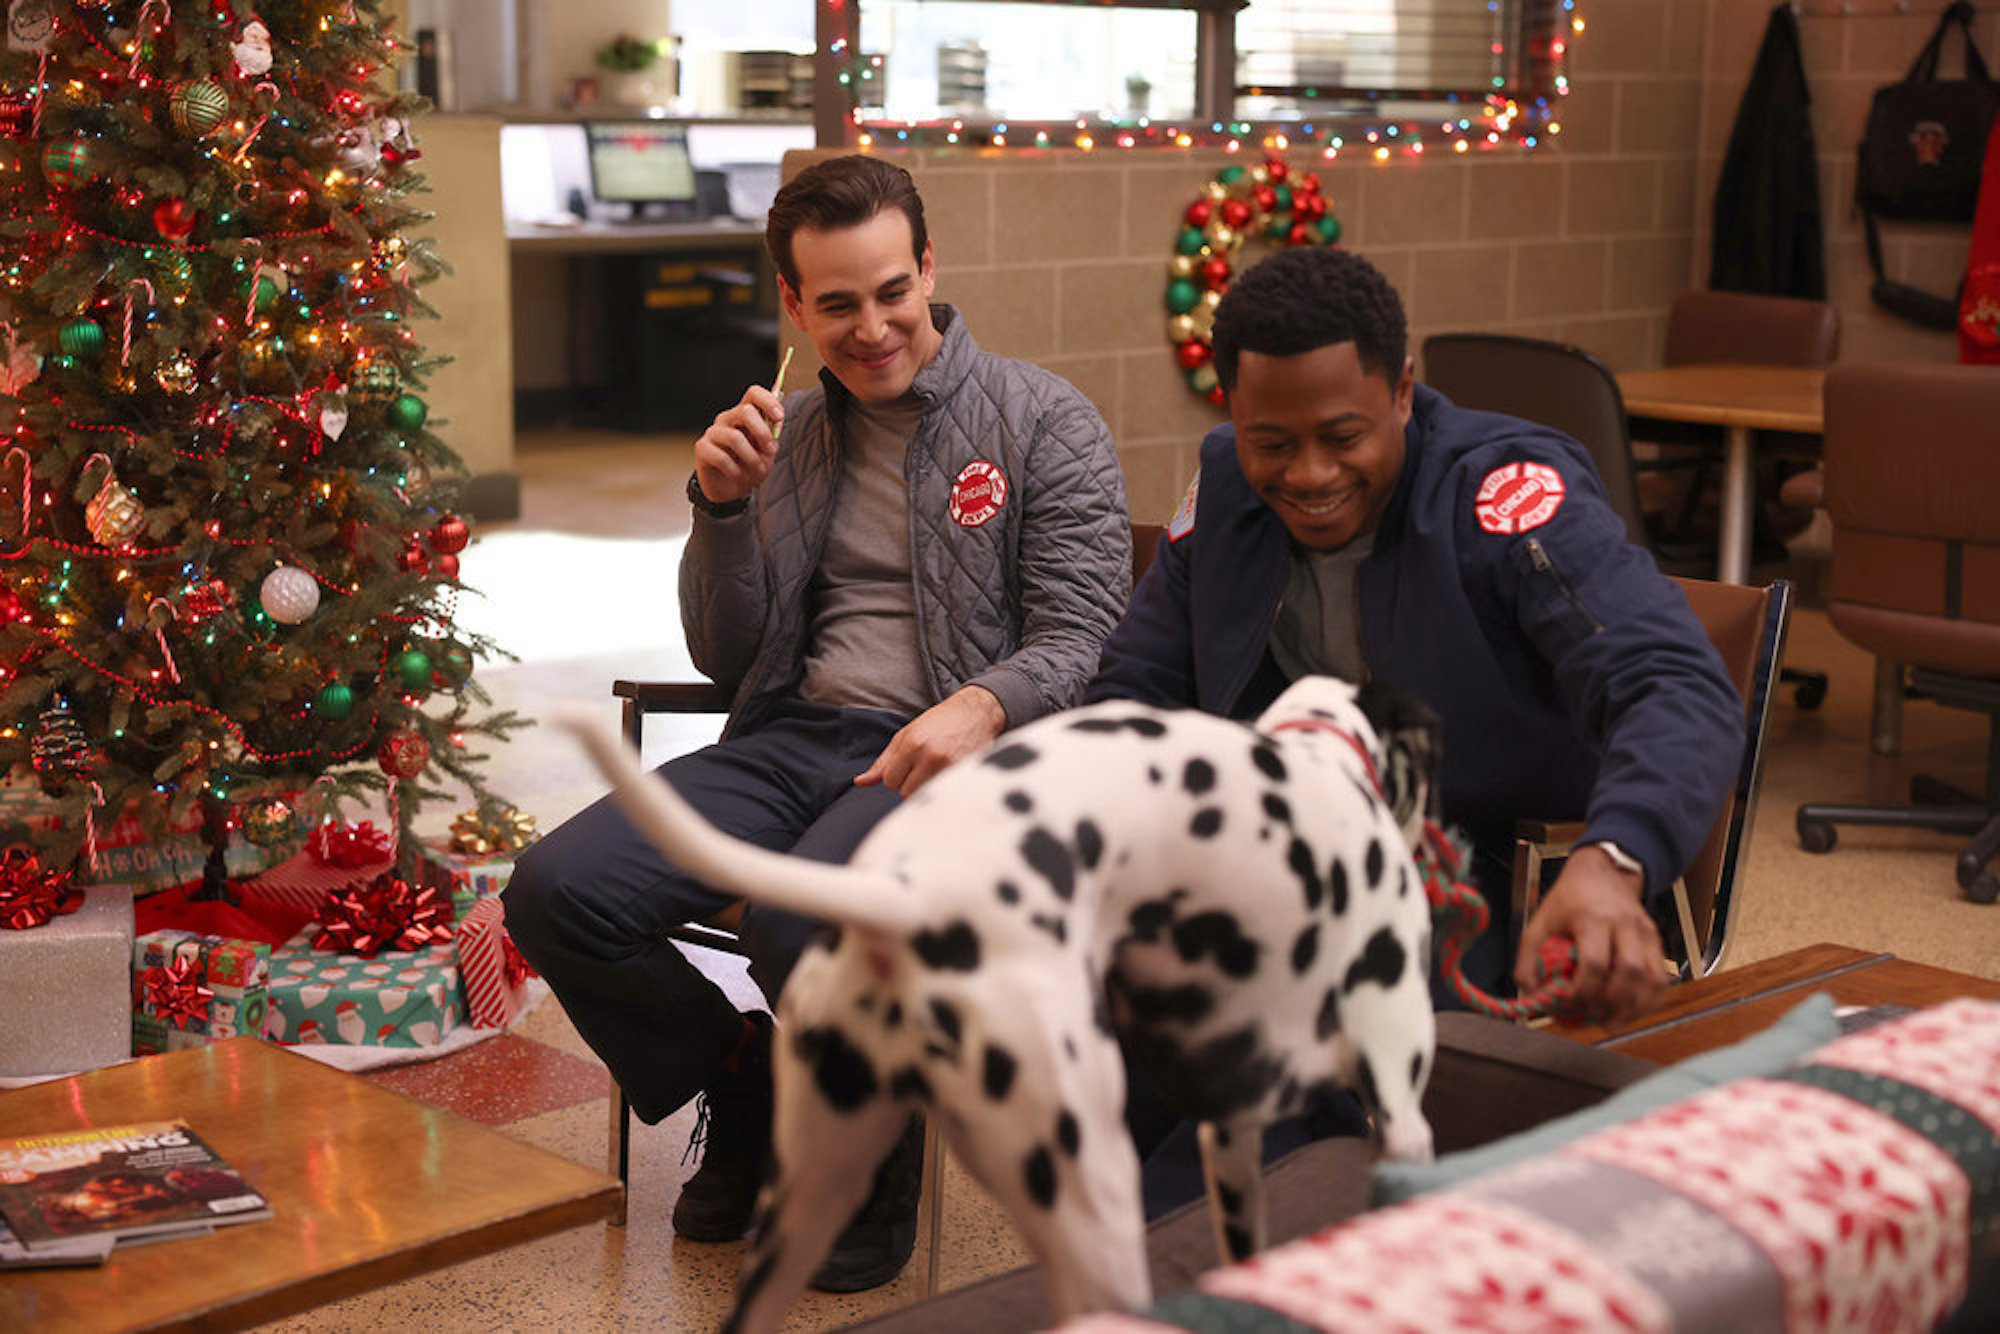 Blake Gallo and Darren Ritter smiling and petting a Dalmatian in 'Chicago Fire' Season 10 Episode 9